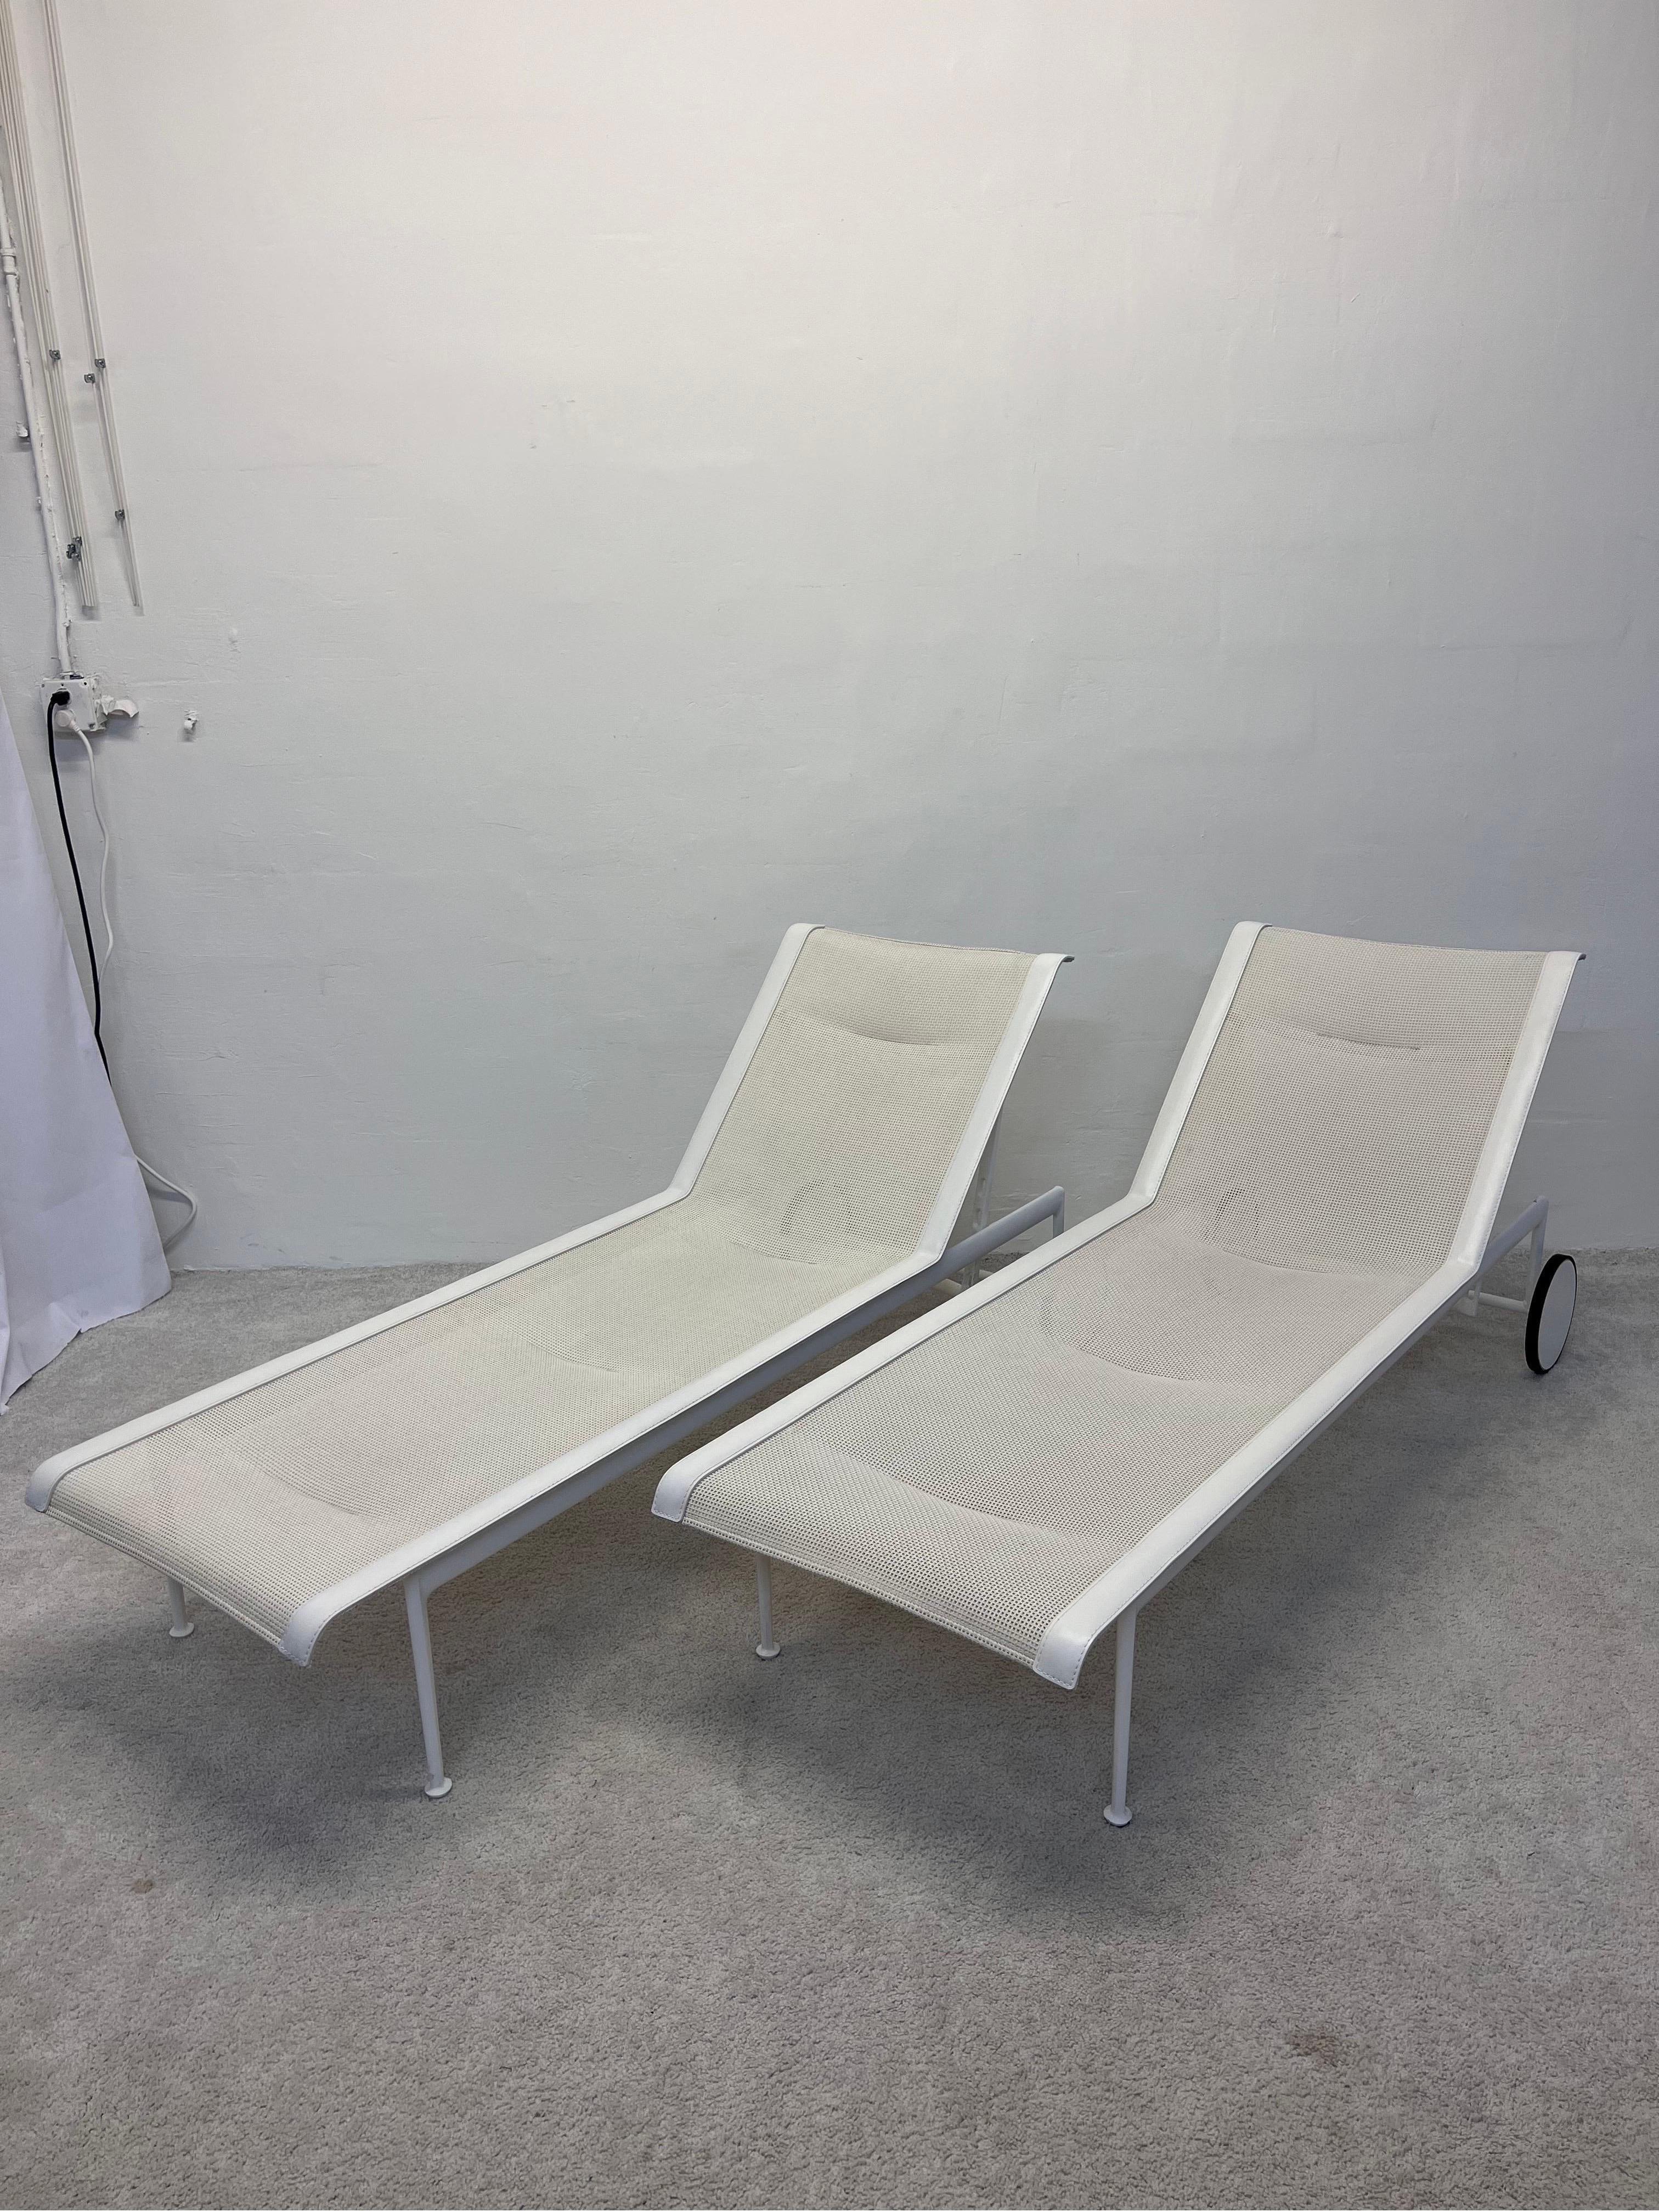 Mid-Century Modern Richard Schultz 1966 Adjustable Outdoor Chaise Lounges for Knoll - a Pair